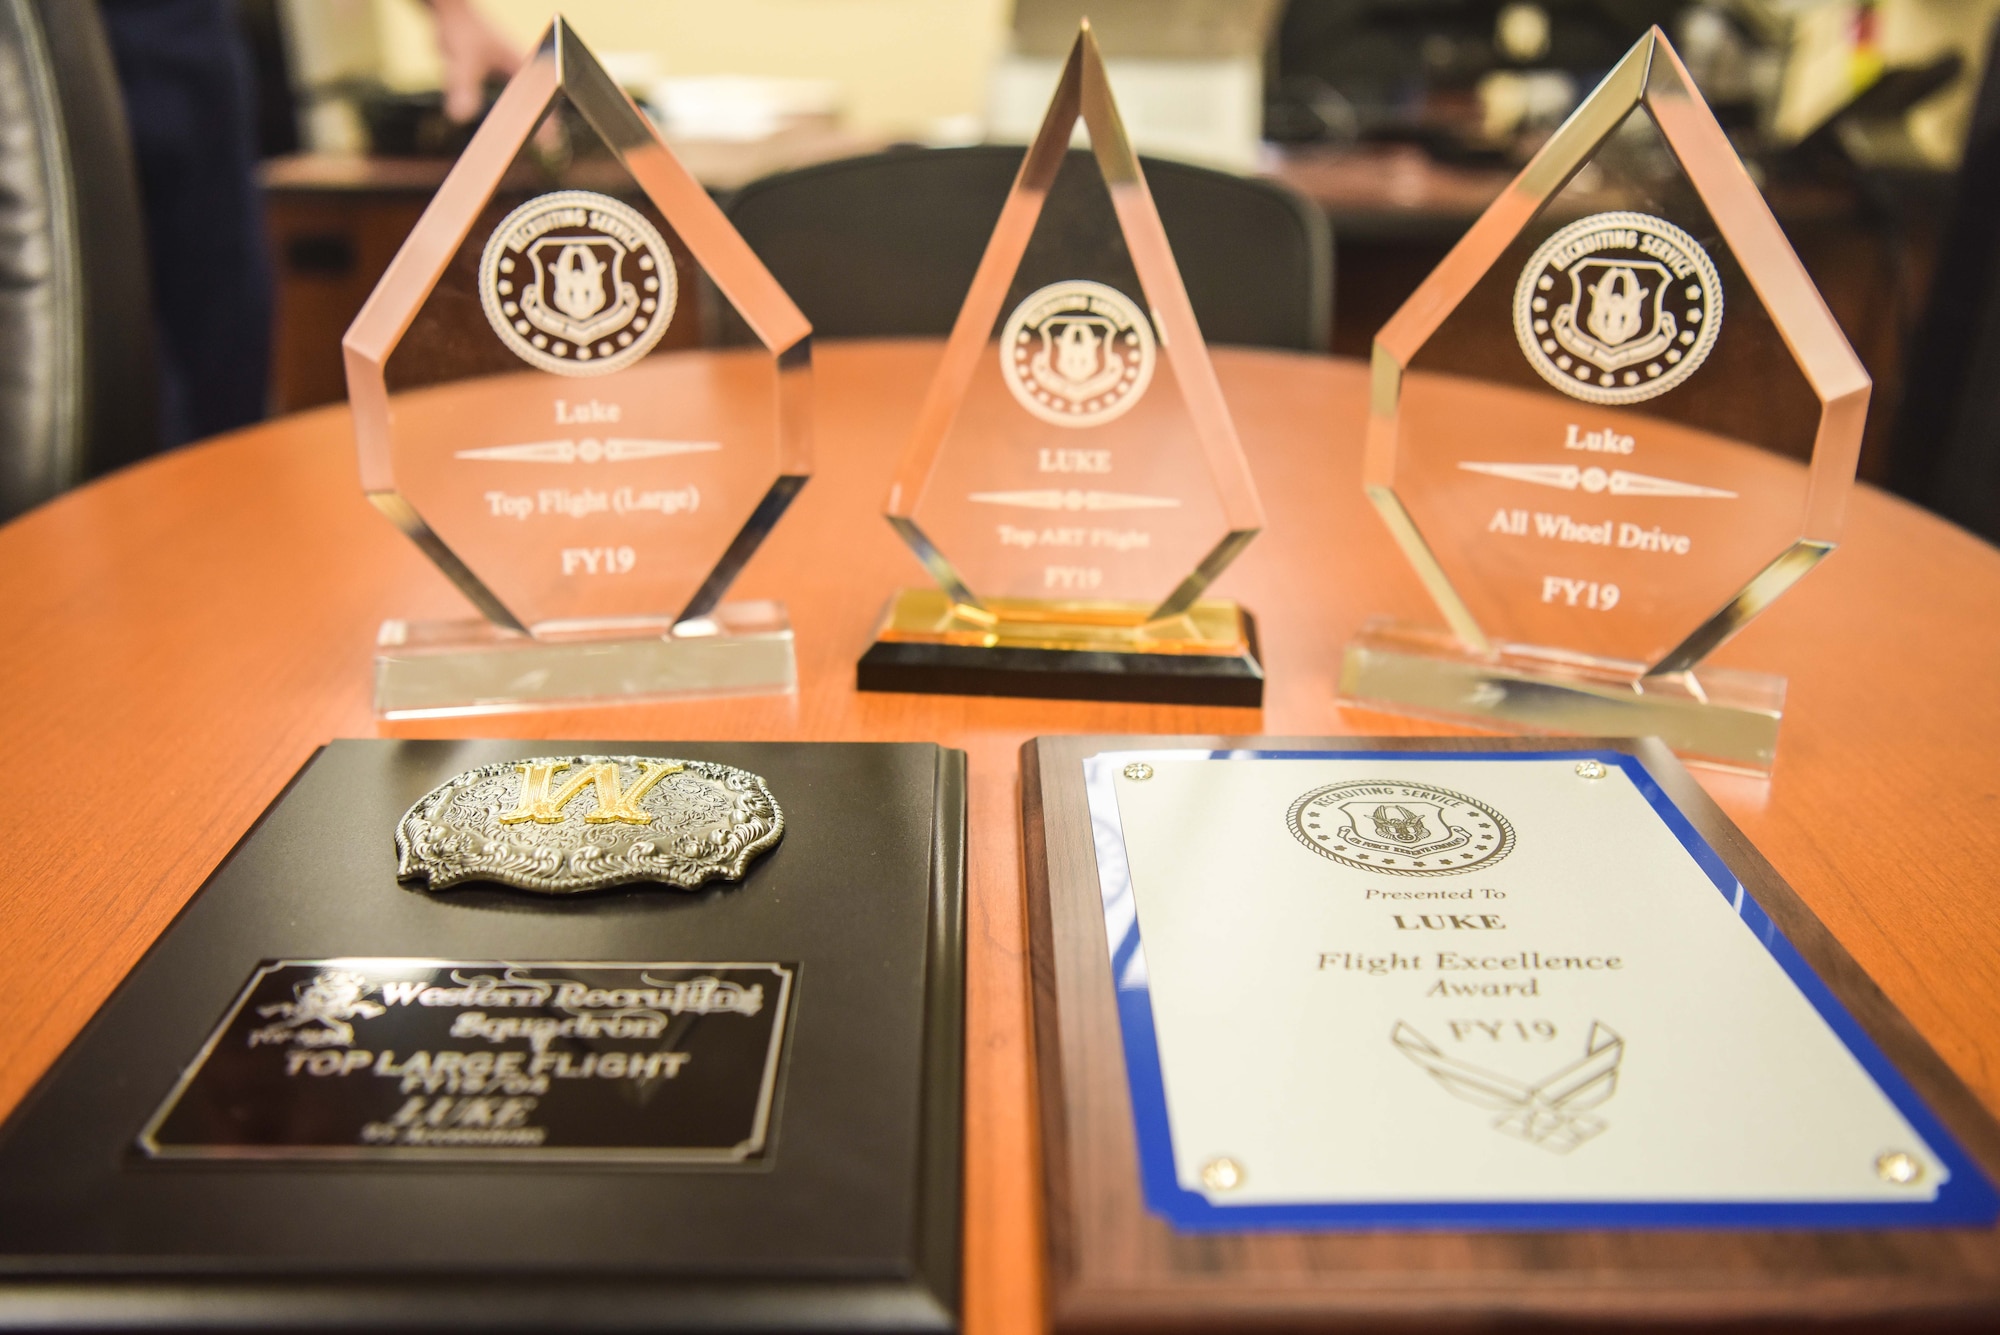 Luke recruiters were recognized with multiple awards during this year’s Air Force Reserve Command recruiting conference in Orlando, Florida in October.